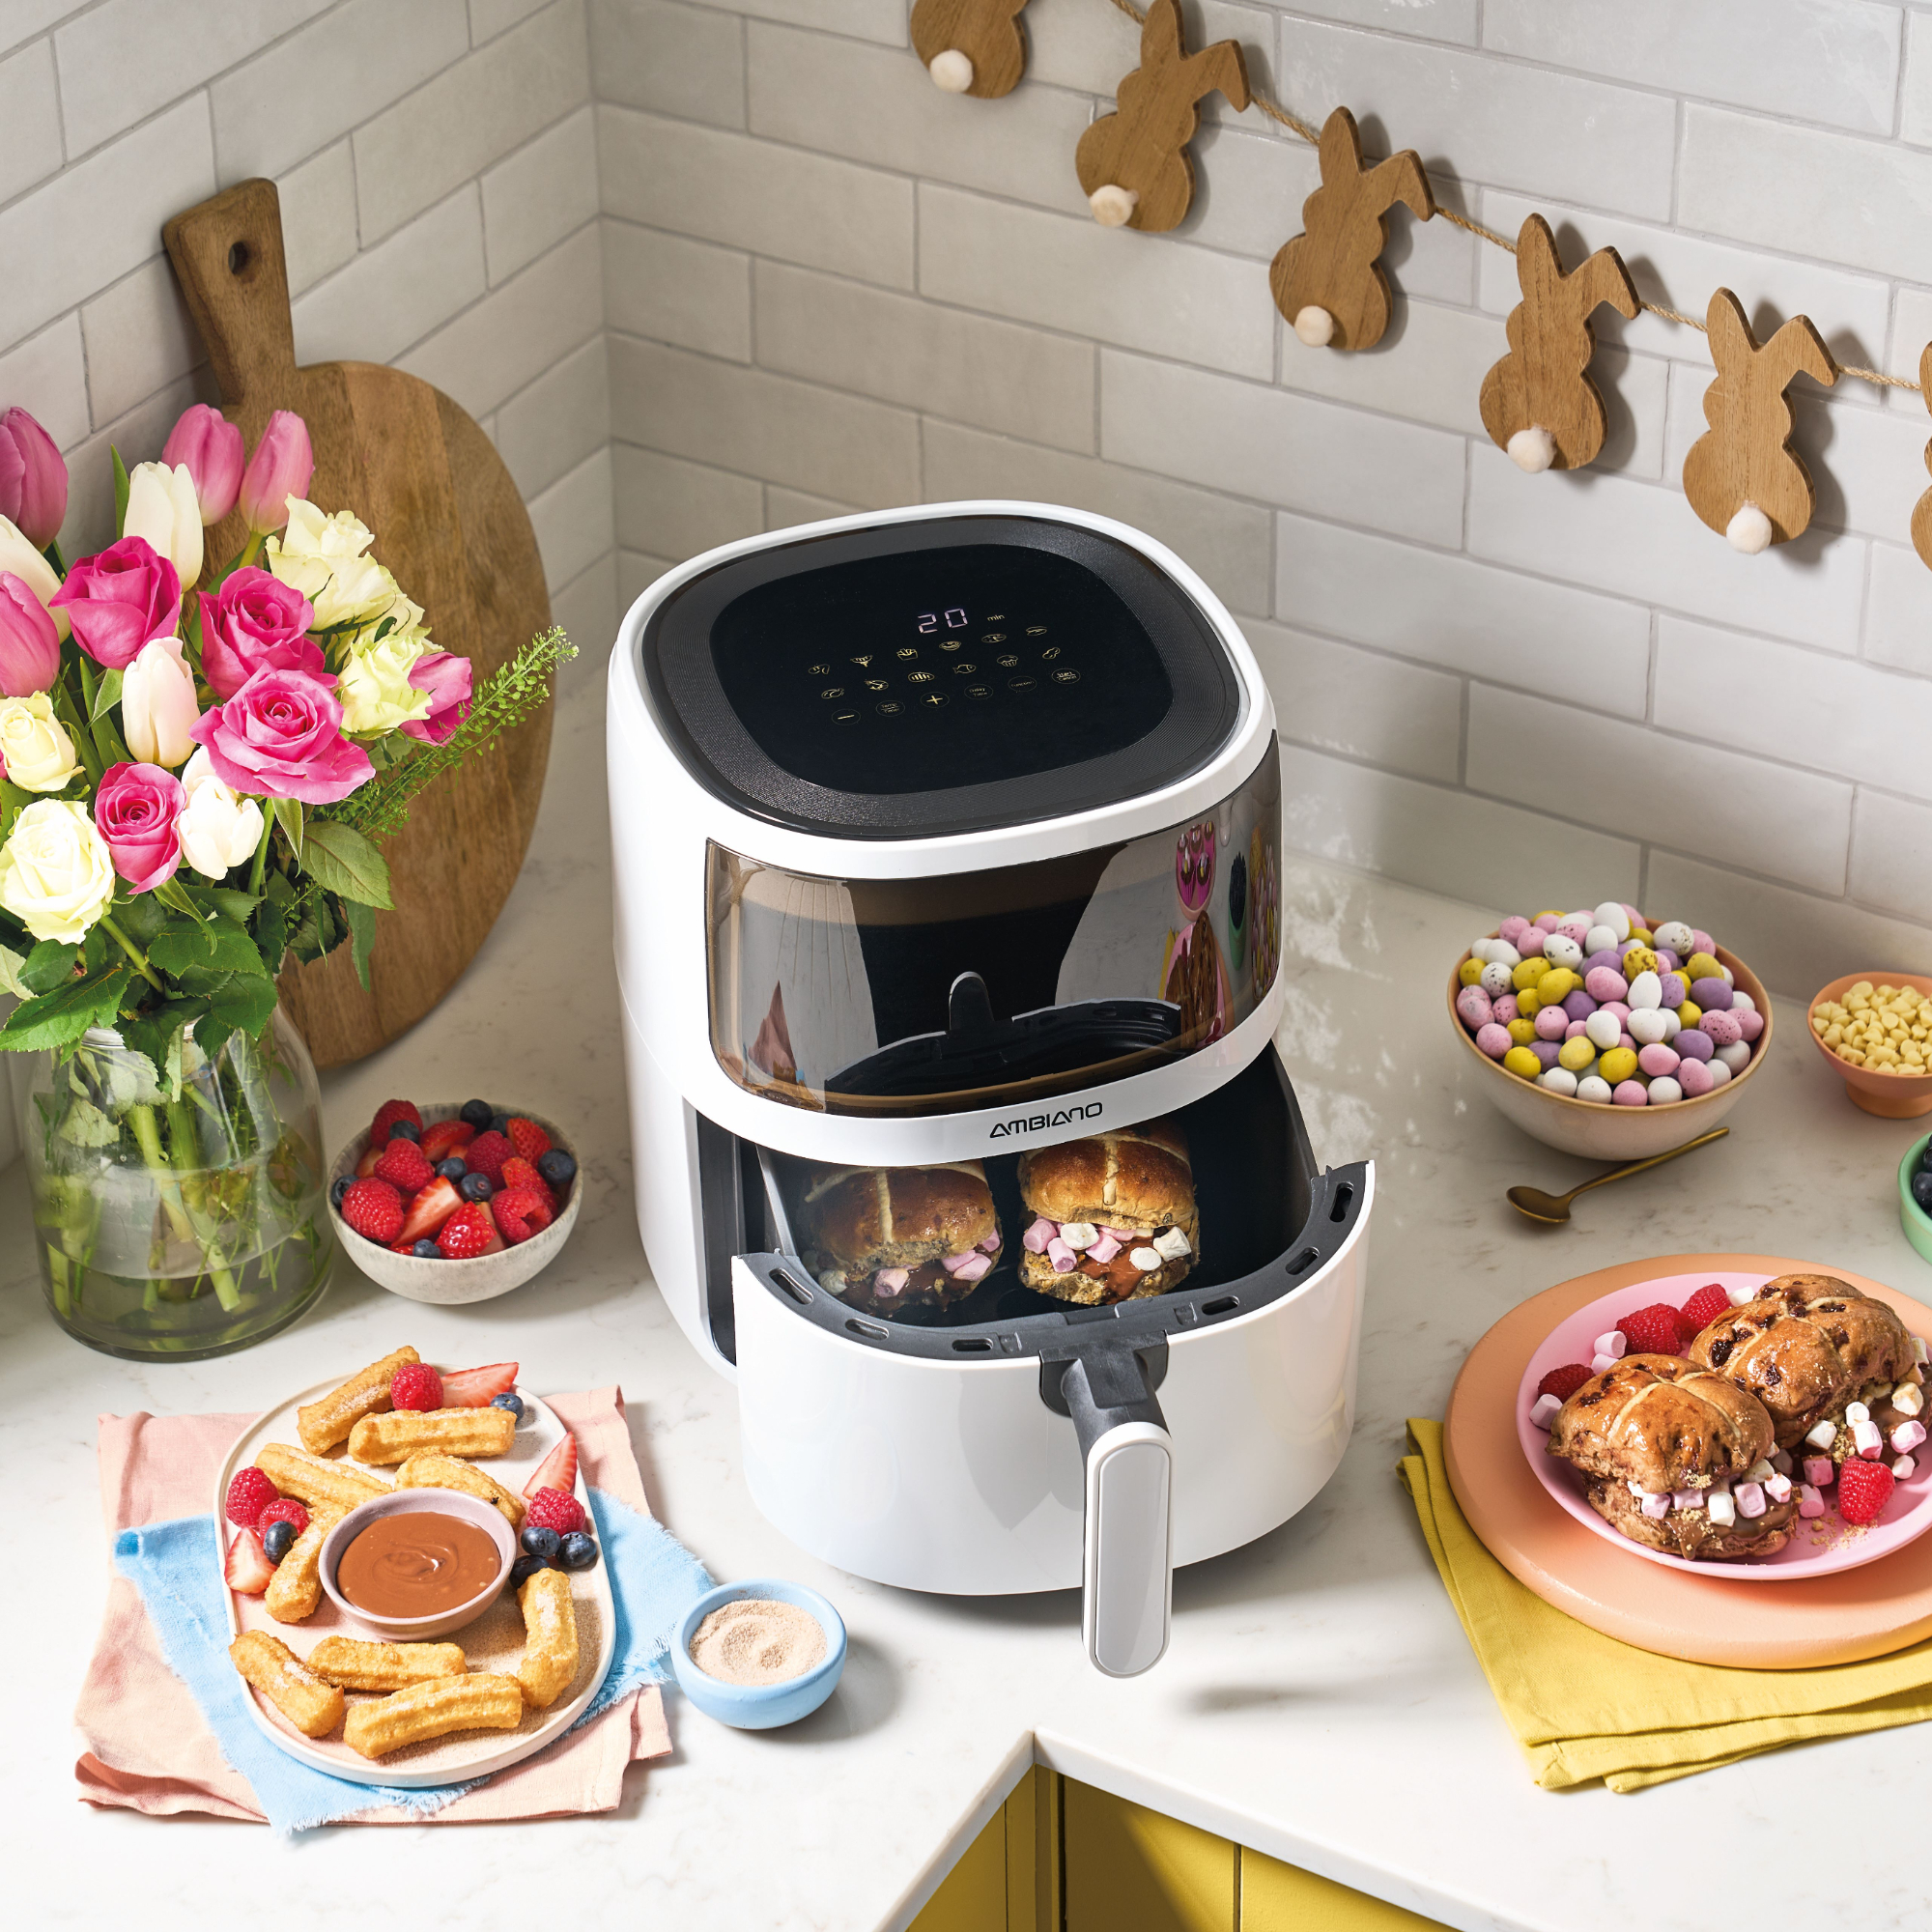 Where to snap up a digital 6L air fryer on sale for just £50 - OK! Magazine